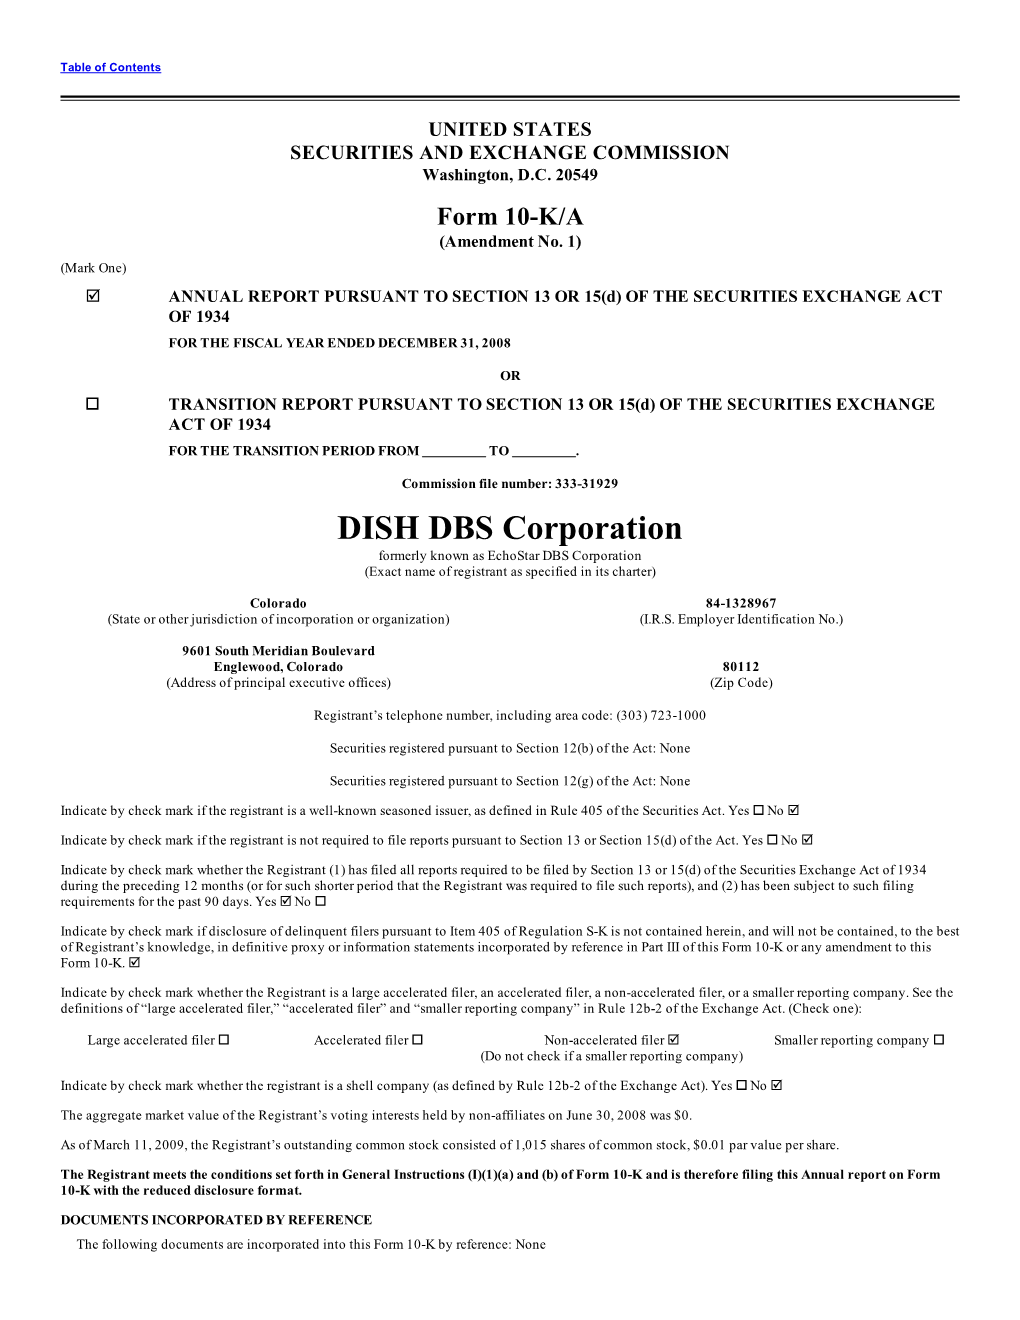 DISH DBS Corporation Formerly Known As Echostar DBS Corporation (Exact Name of Registrant As Specified in Its Charter)